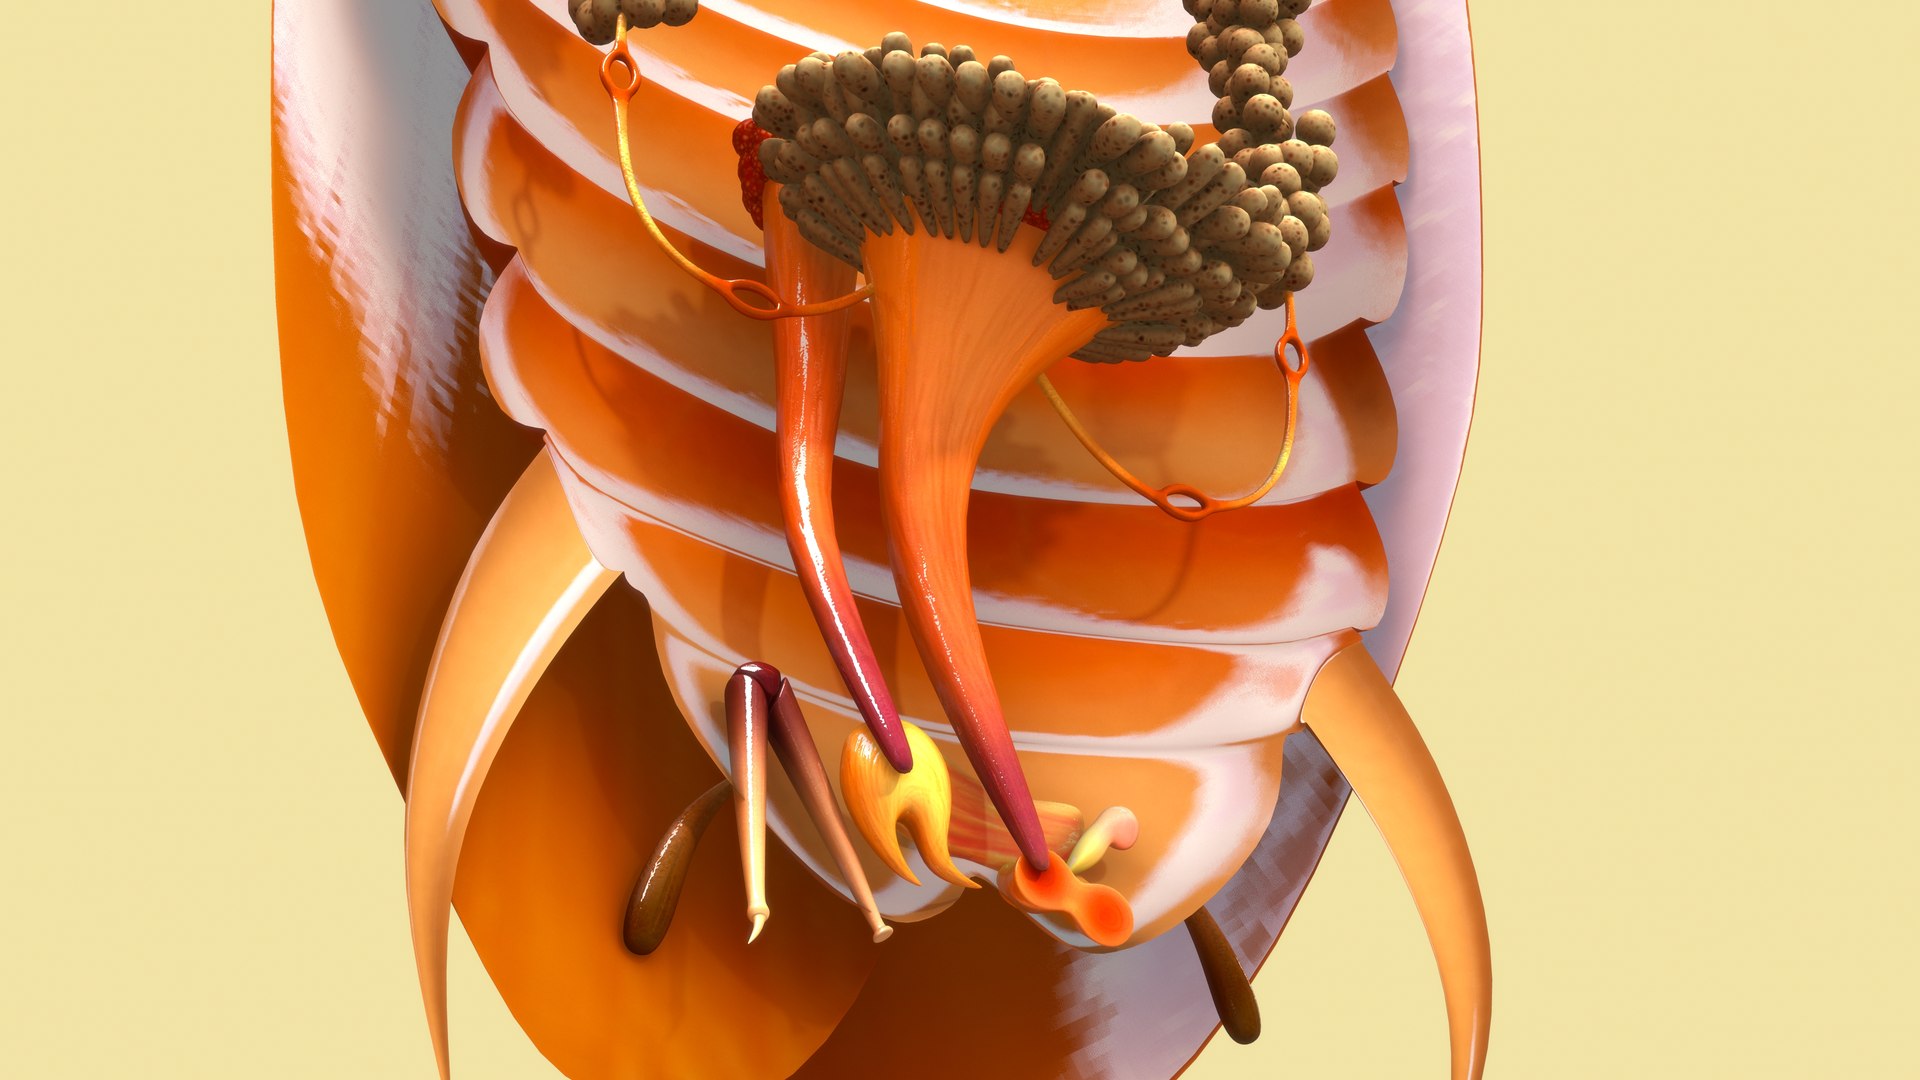 Male Reproductive System Of Cockroach 3d Model Turbosquid 1856575 